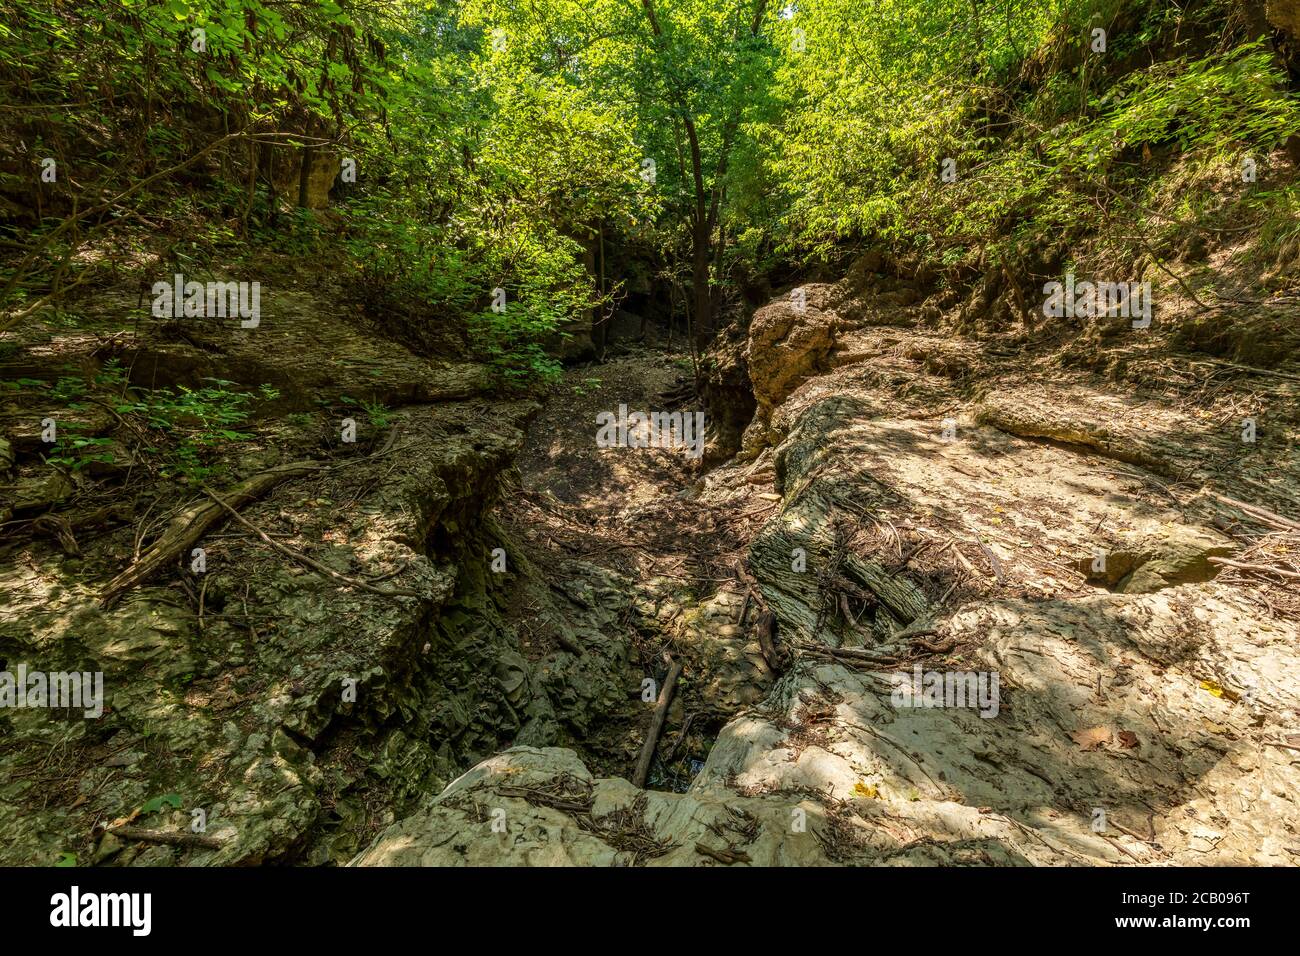 A Dried Up Riverbed In The Woods Stock Photo